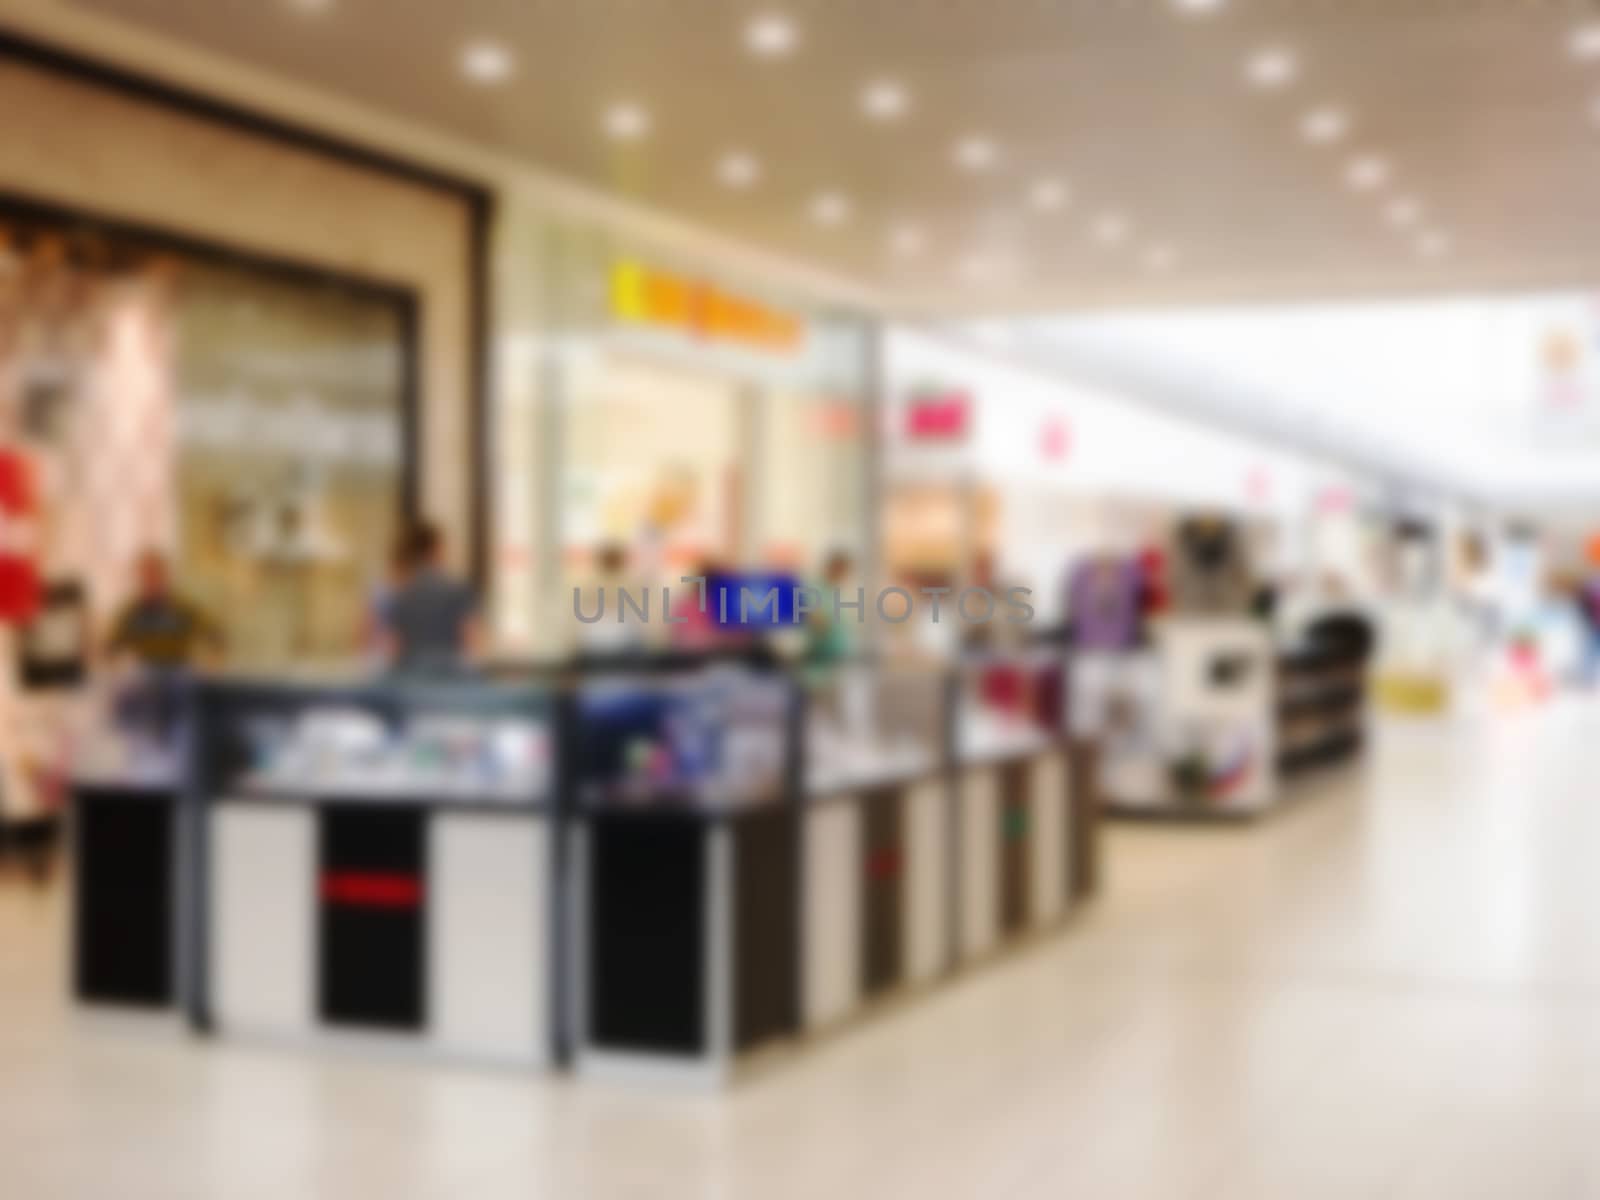 Abstract blurred shopping mall hall as background